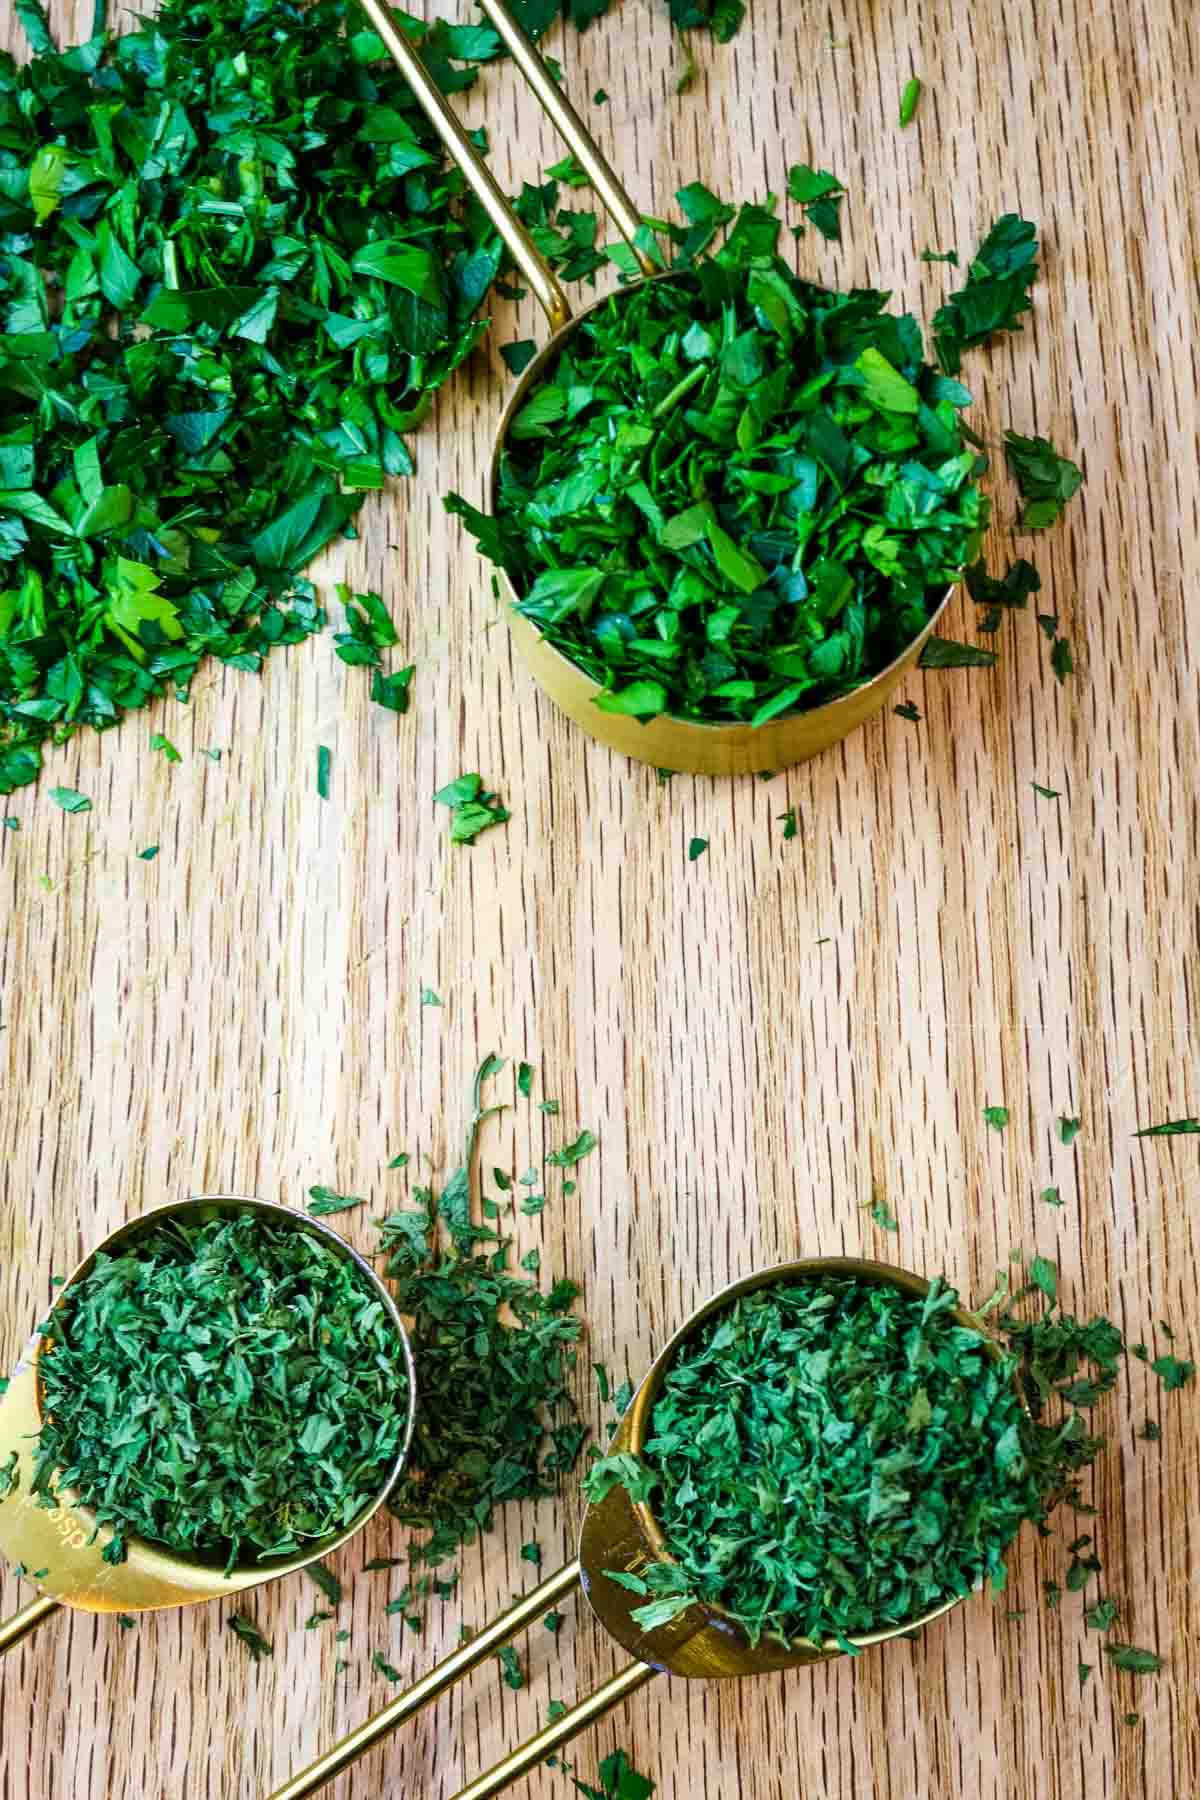 Fresh and dried parsley in measuring cups and spoons.